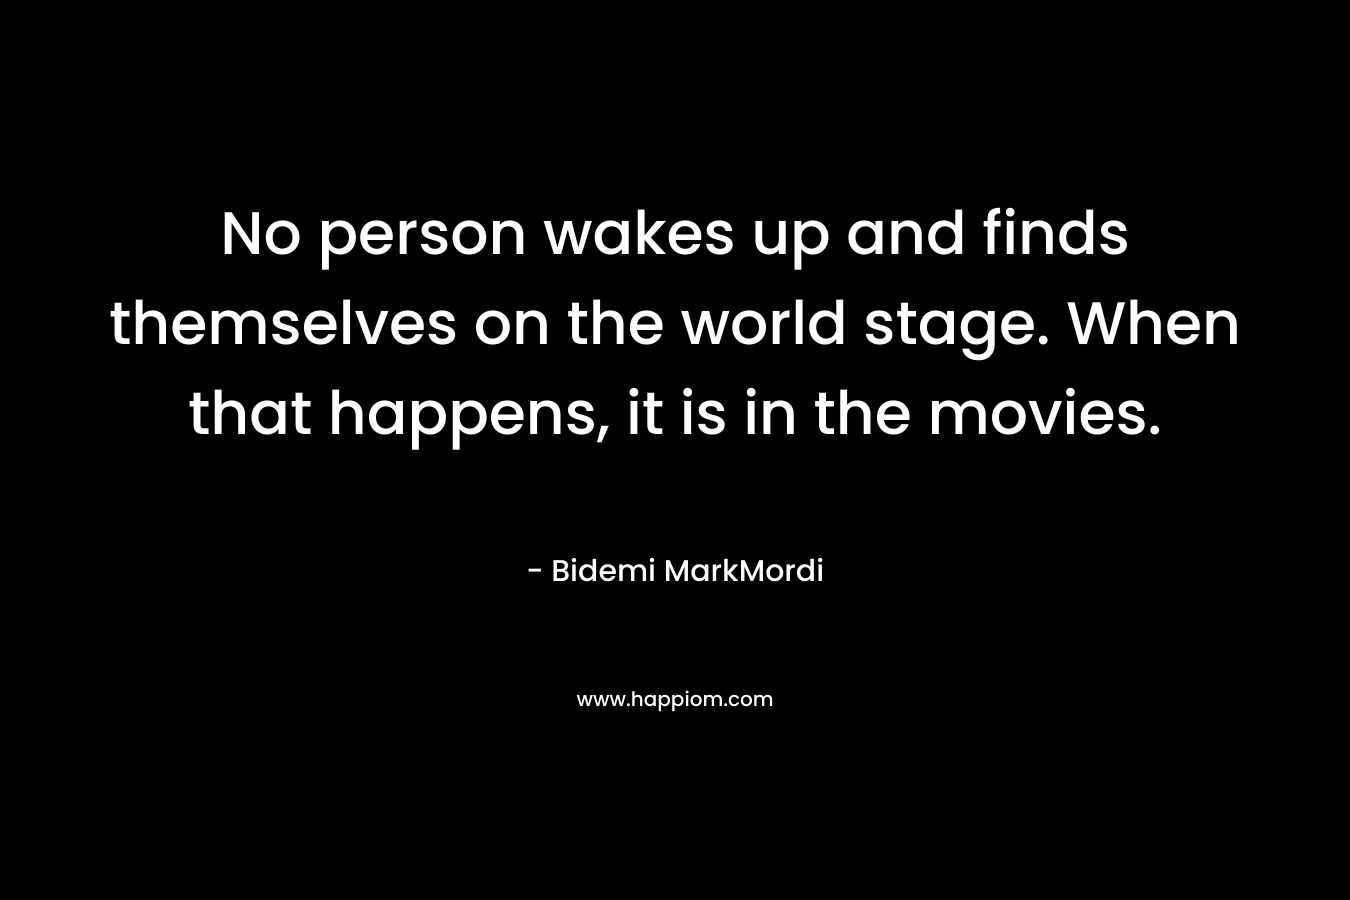 No person wakes up and finds themselves on the world stage. When that happens, it is in the movies.